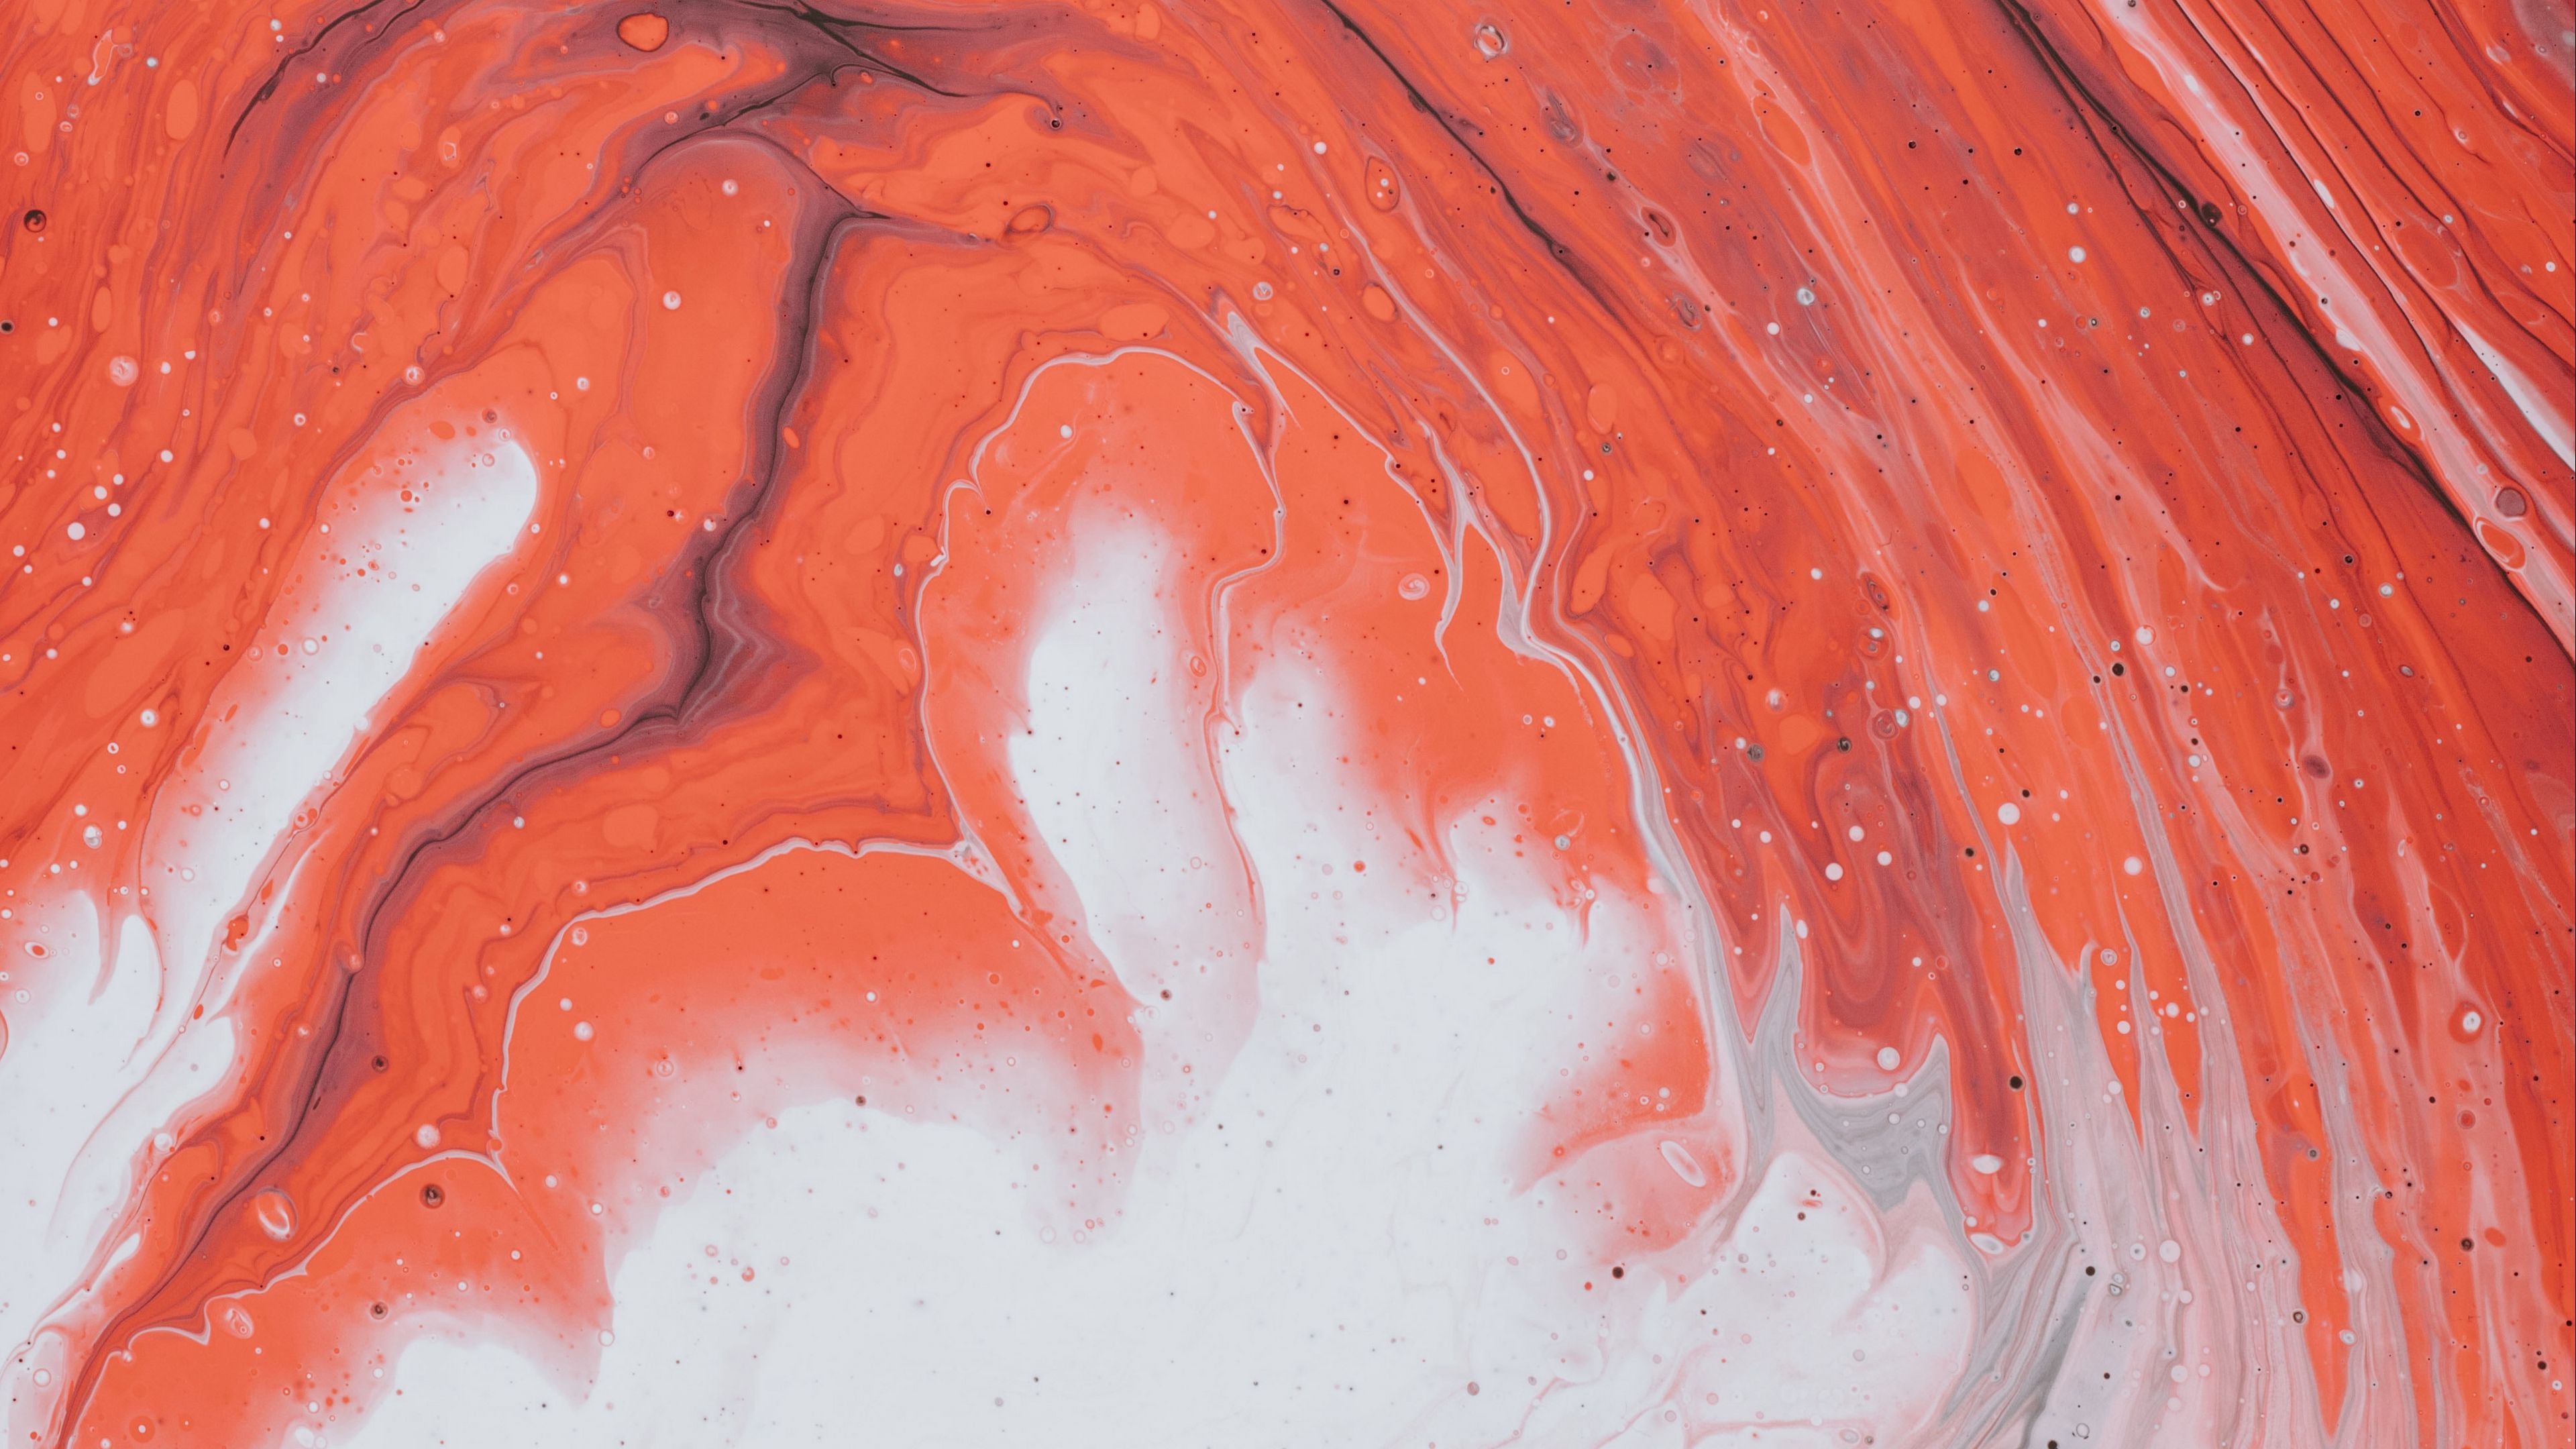 Download wallpaper 3840x2160 stains, paint, liquid, mixing, colorful 4k uhd 16:9 HD background